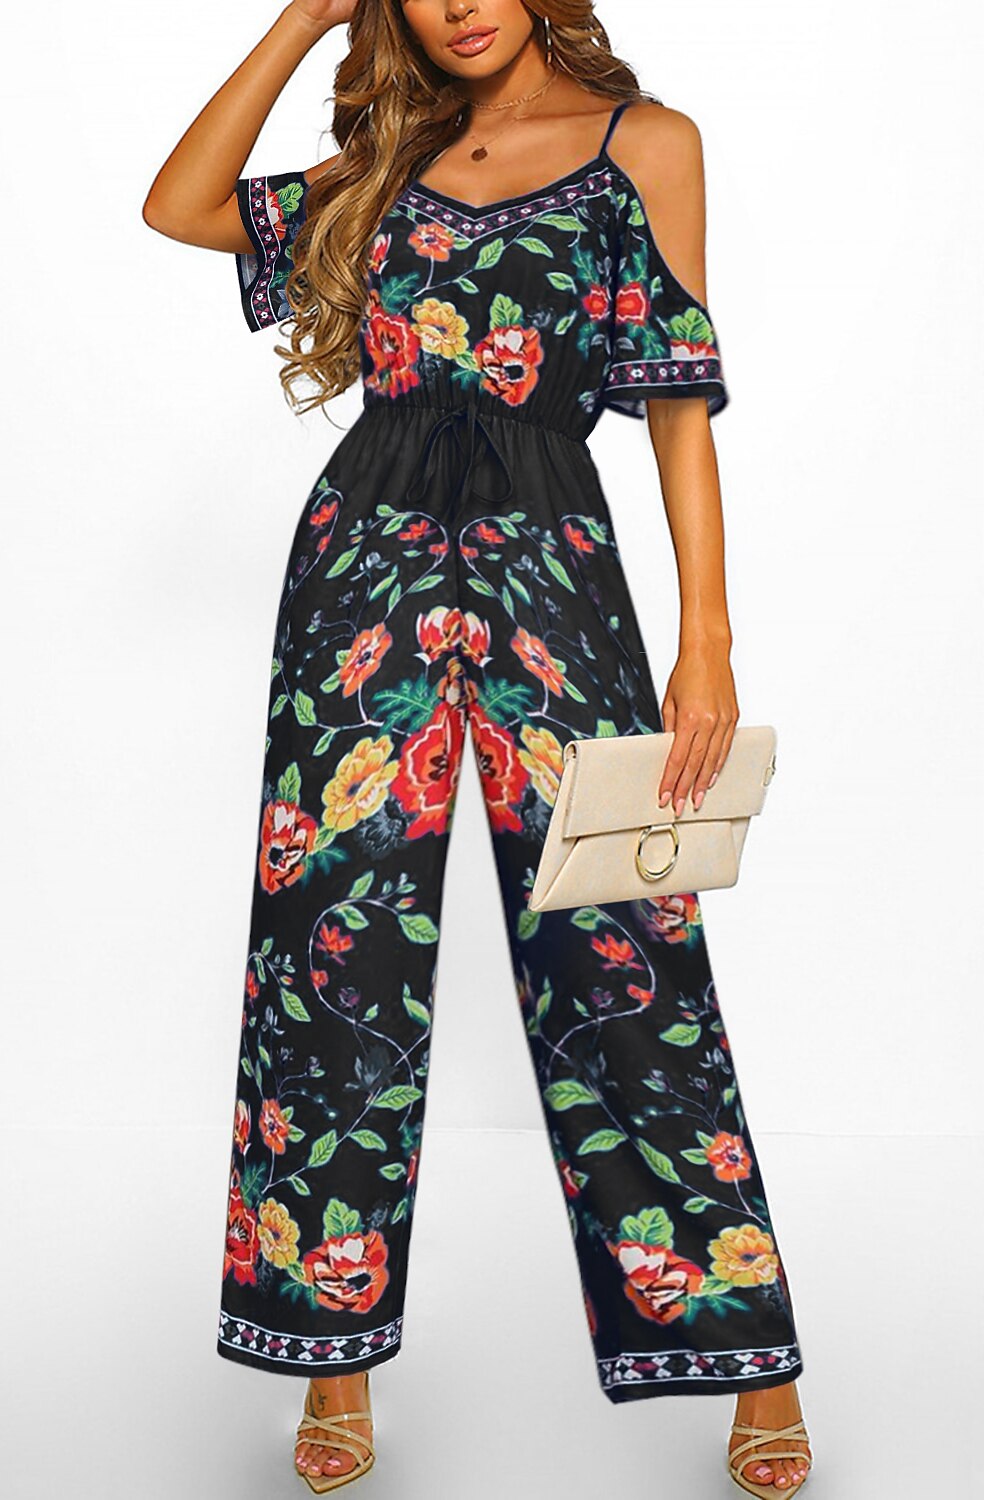 Shepicker Print Floral Cold Shoulder Casual Vacation Straight Jumpsuit